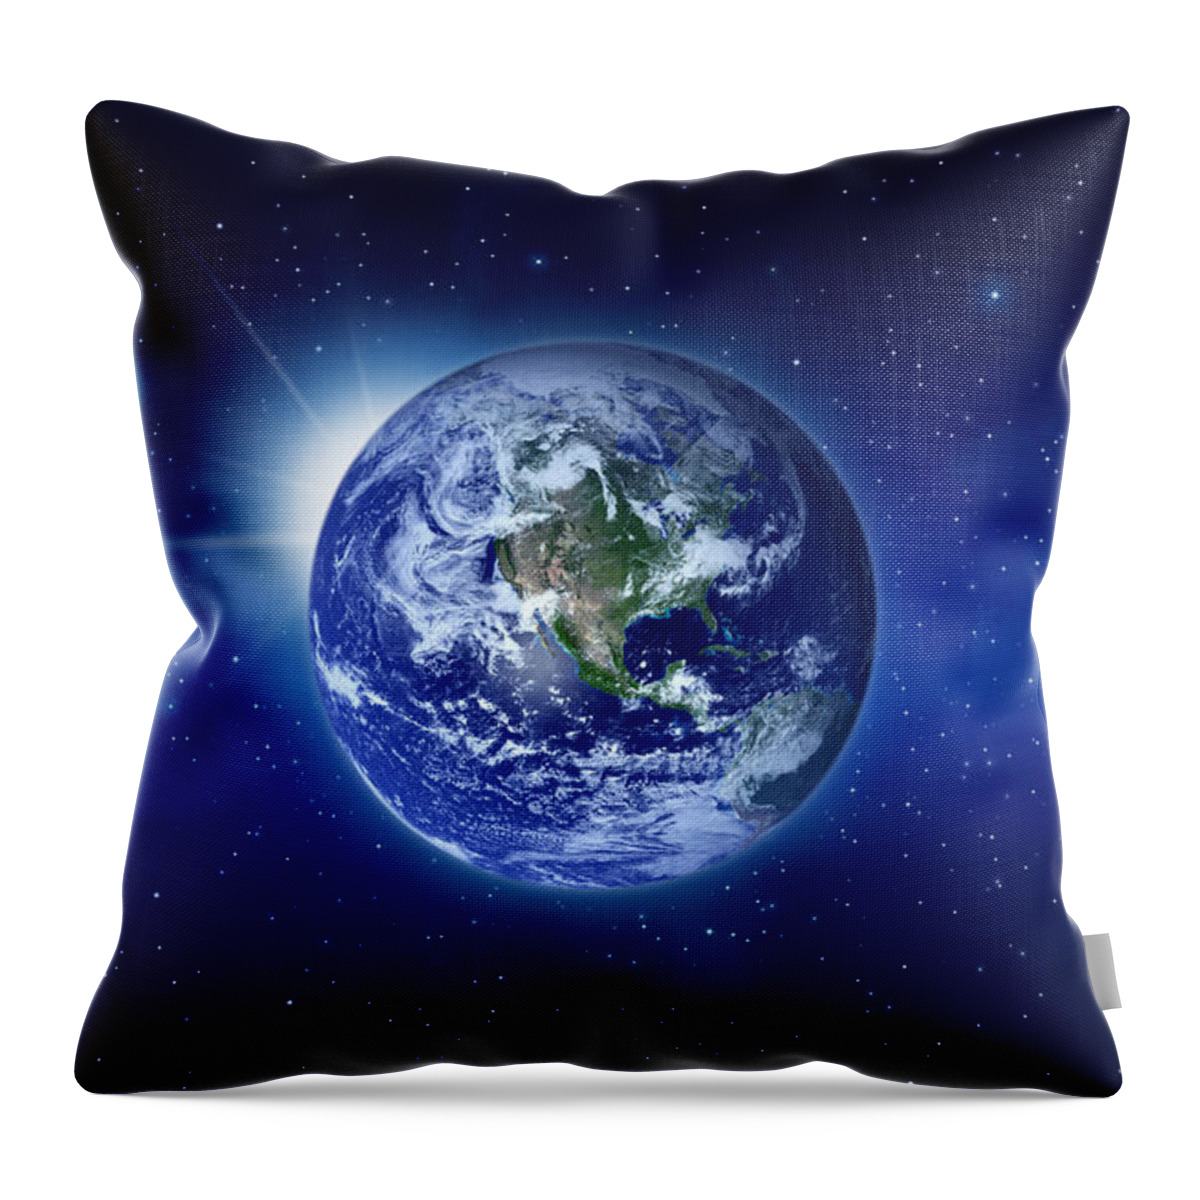 Constellation Throw Pillow featuring the photograph Planet Earth With Rising Sun Behind by Narvikk